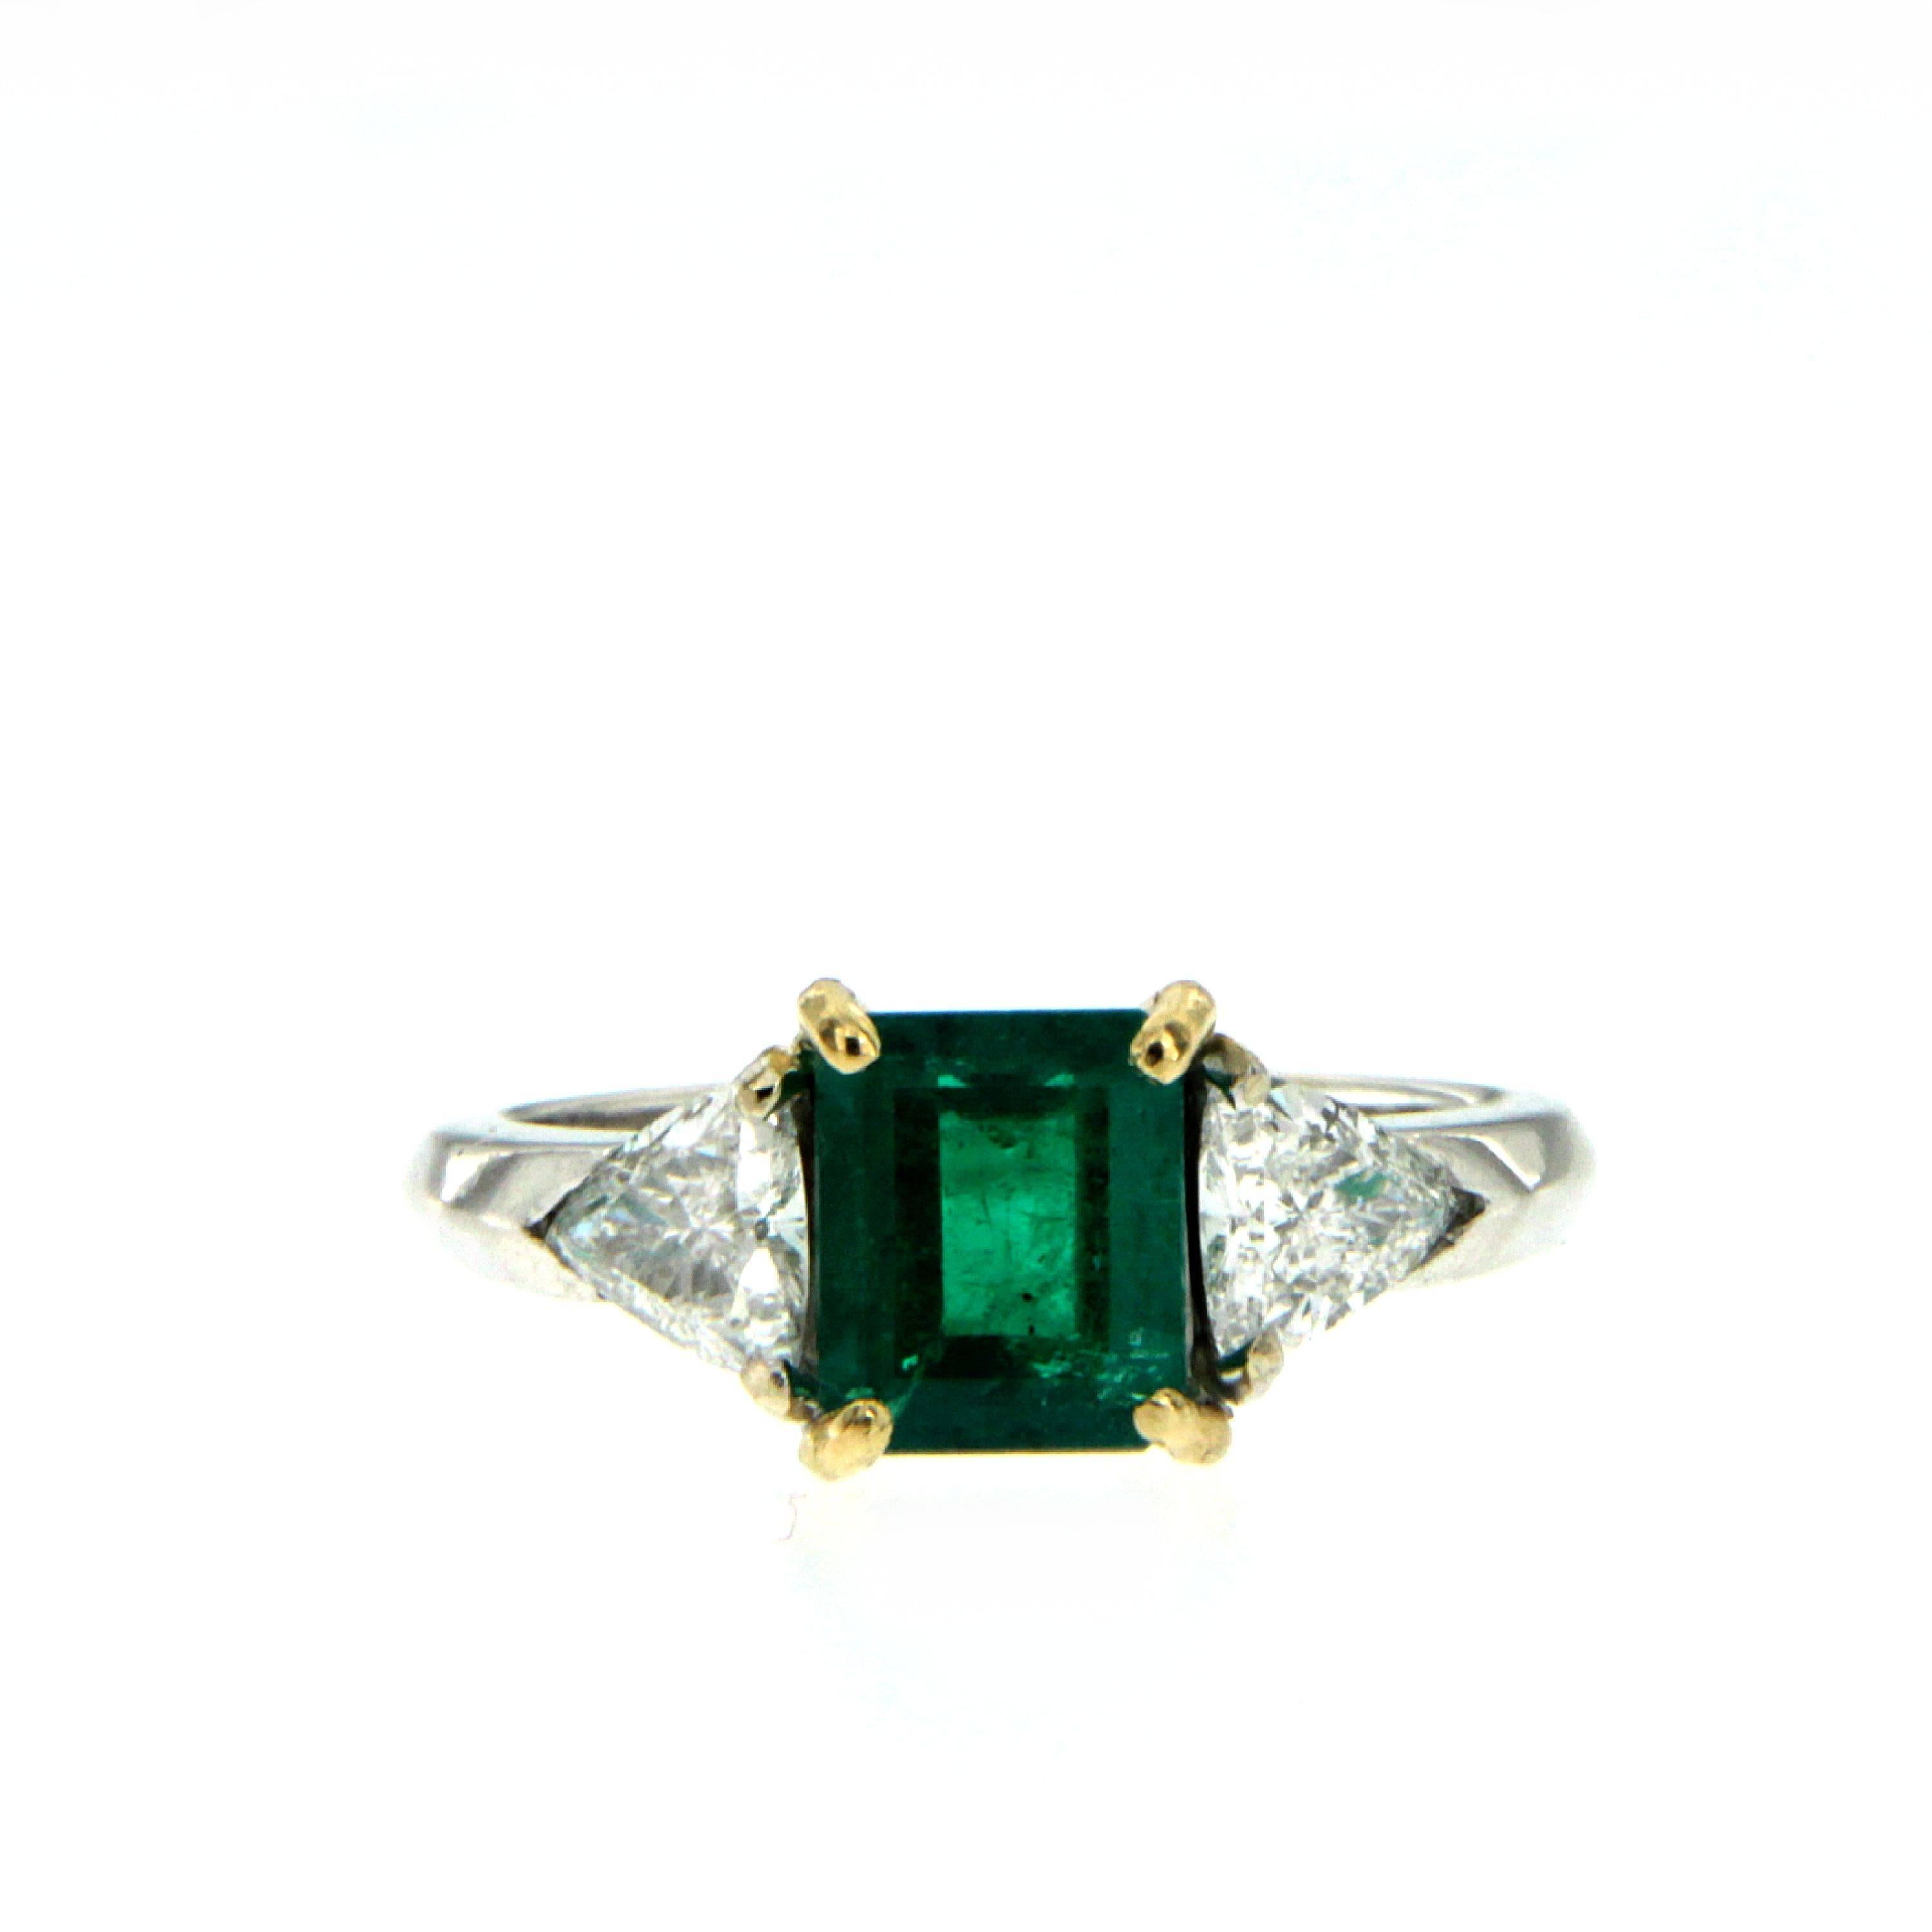 An exquisite 18k white Gold ring featuring a 1.37 ct Emerald-cut Colombian Emerald. Flanked on each side are brilliant trillion diamonds totaling 0.74 carats. The center emerald is set in yellow gold split-prongs. 

Ring Size: US 6 - IT 12 - FR 52